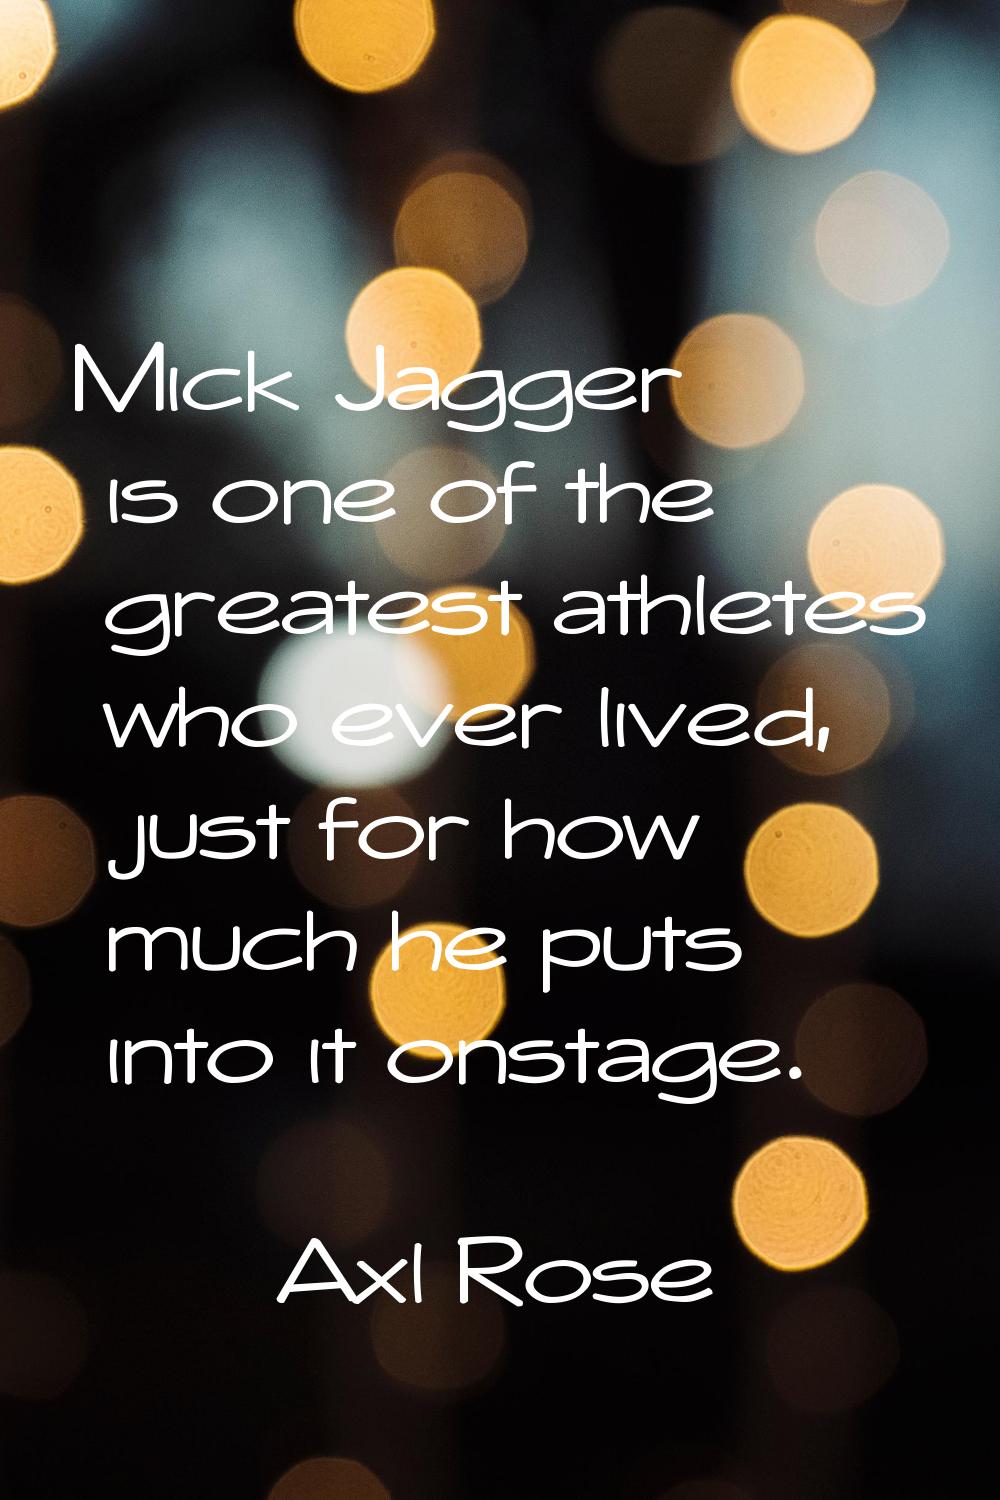 Mick Jagger is one of the greatest athletes who ever lived, just for how much he puts into it onsta